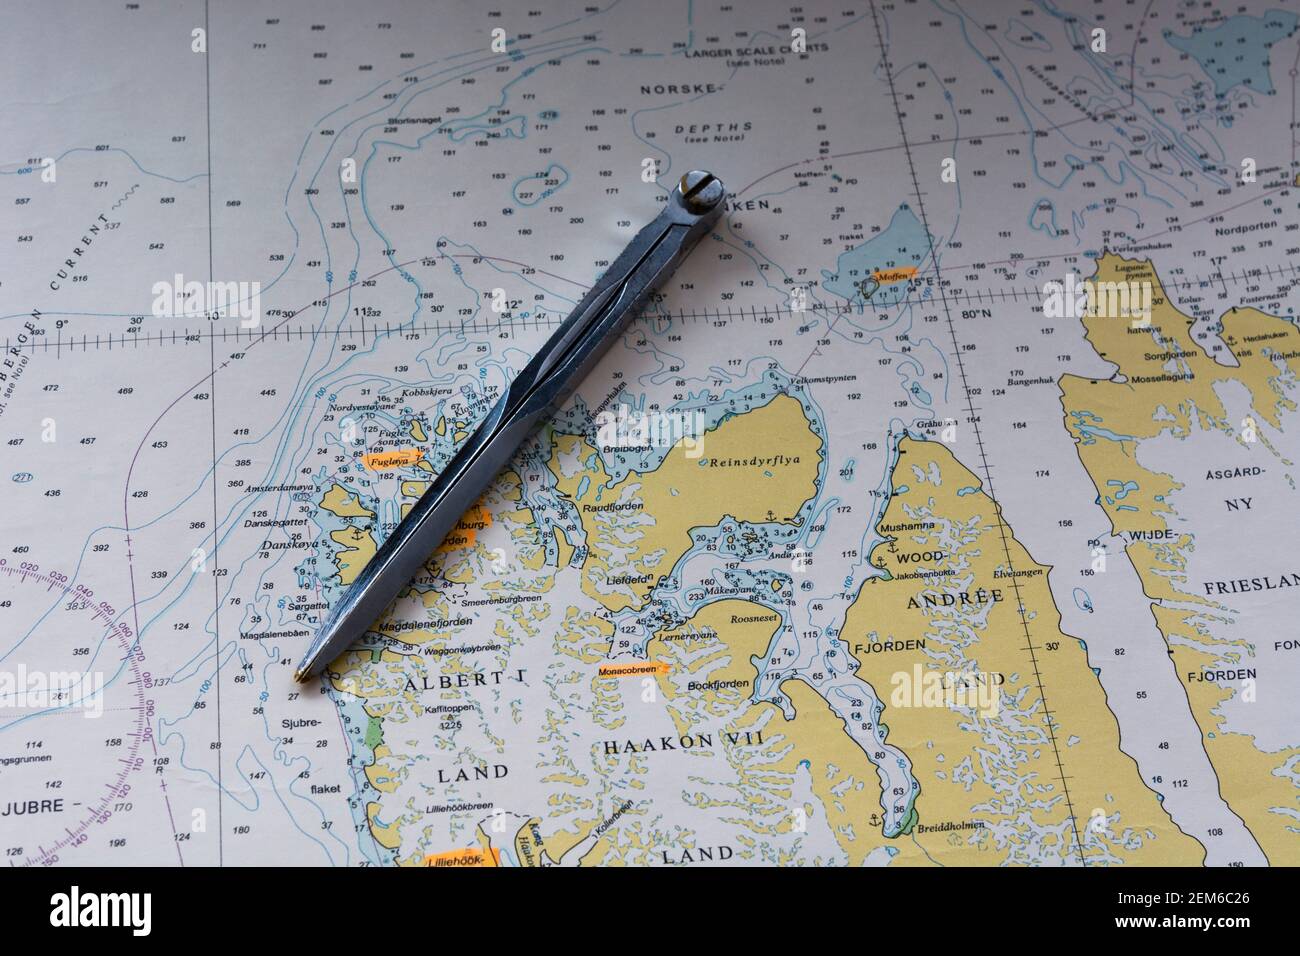 The nautical map of Svalbard islands, Norway. Stock Photo